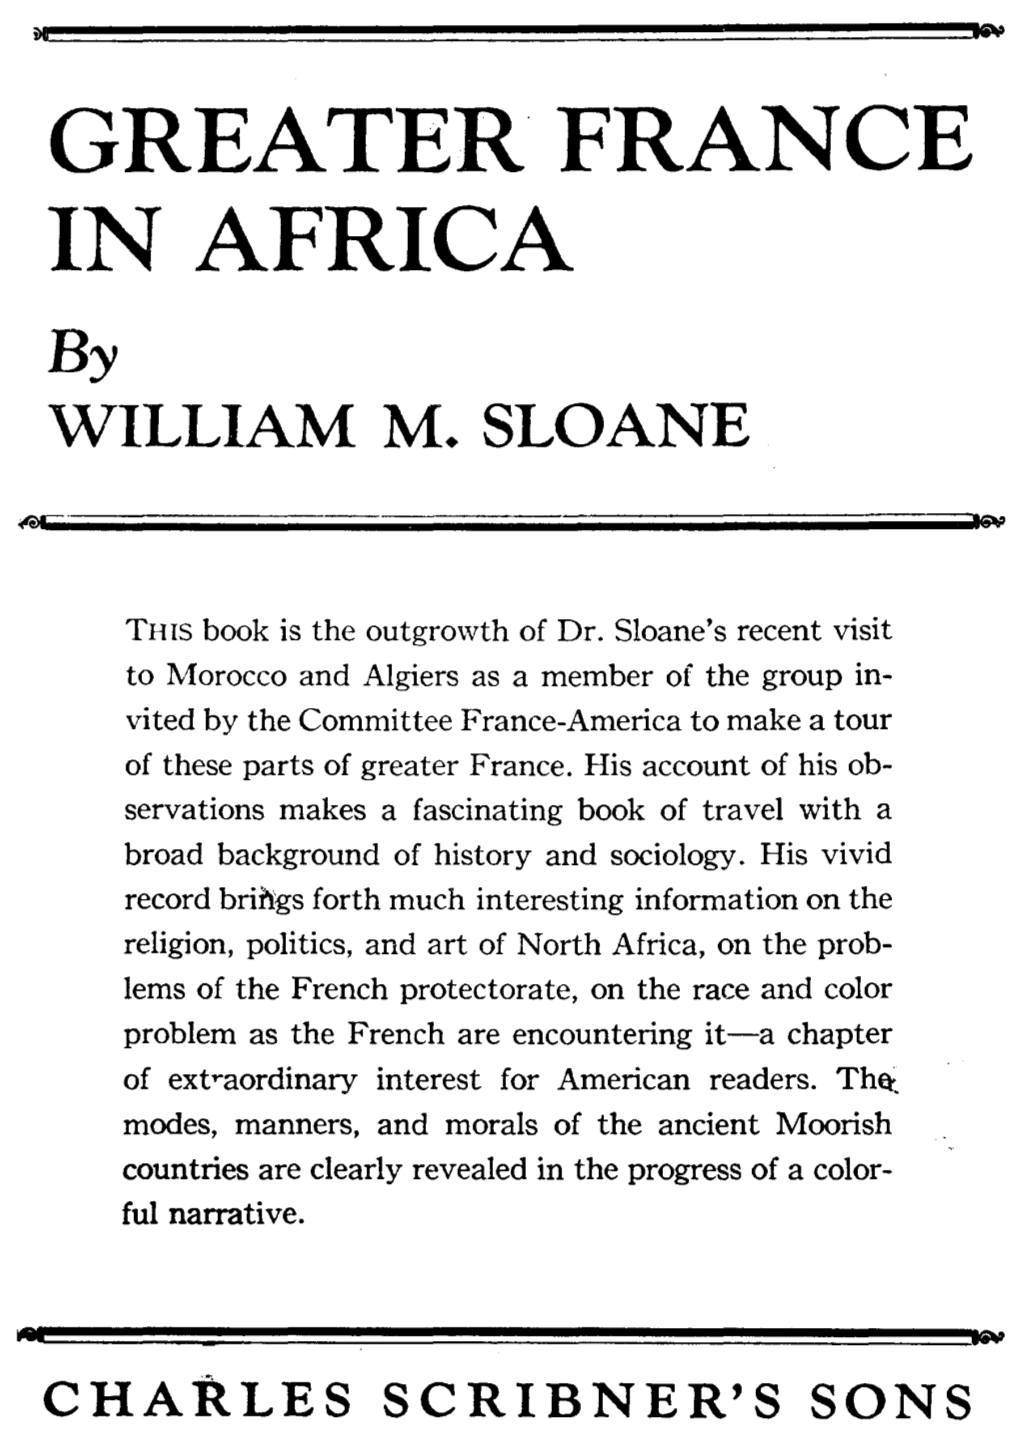 GREATER. FRANCE in AFRICA by WILLIAM M